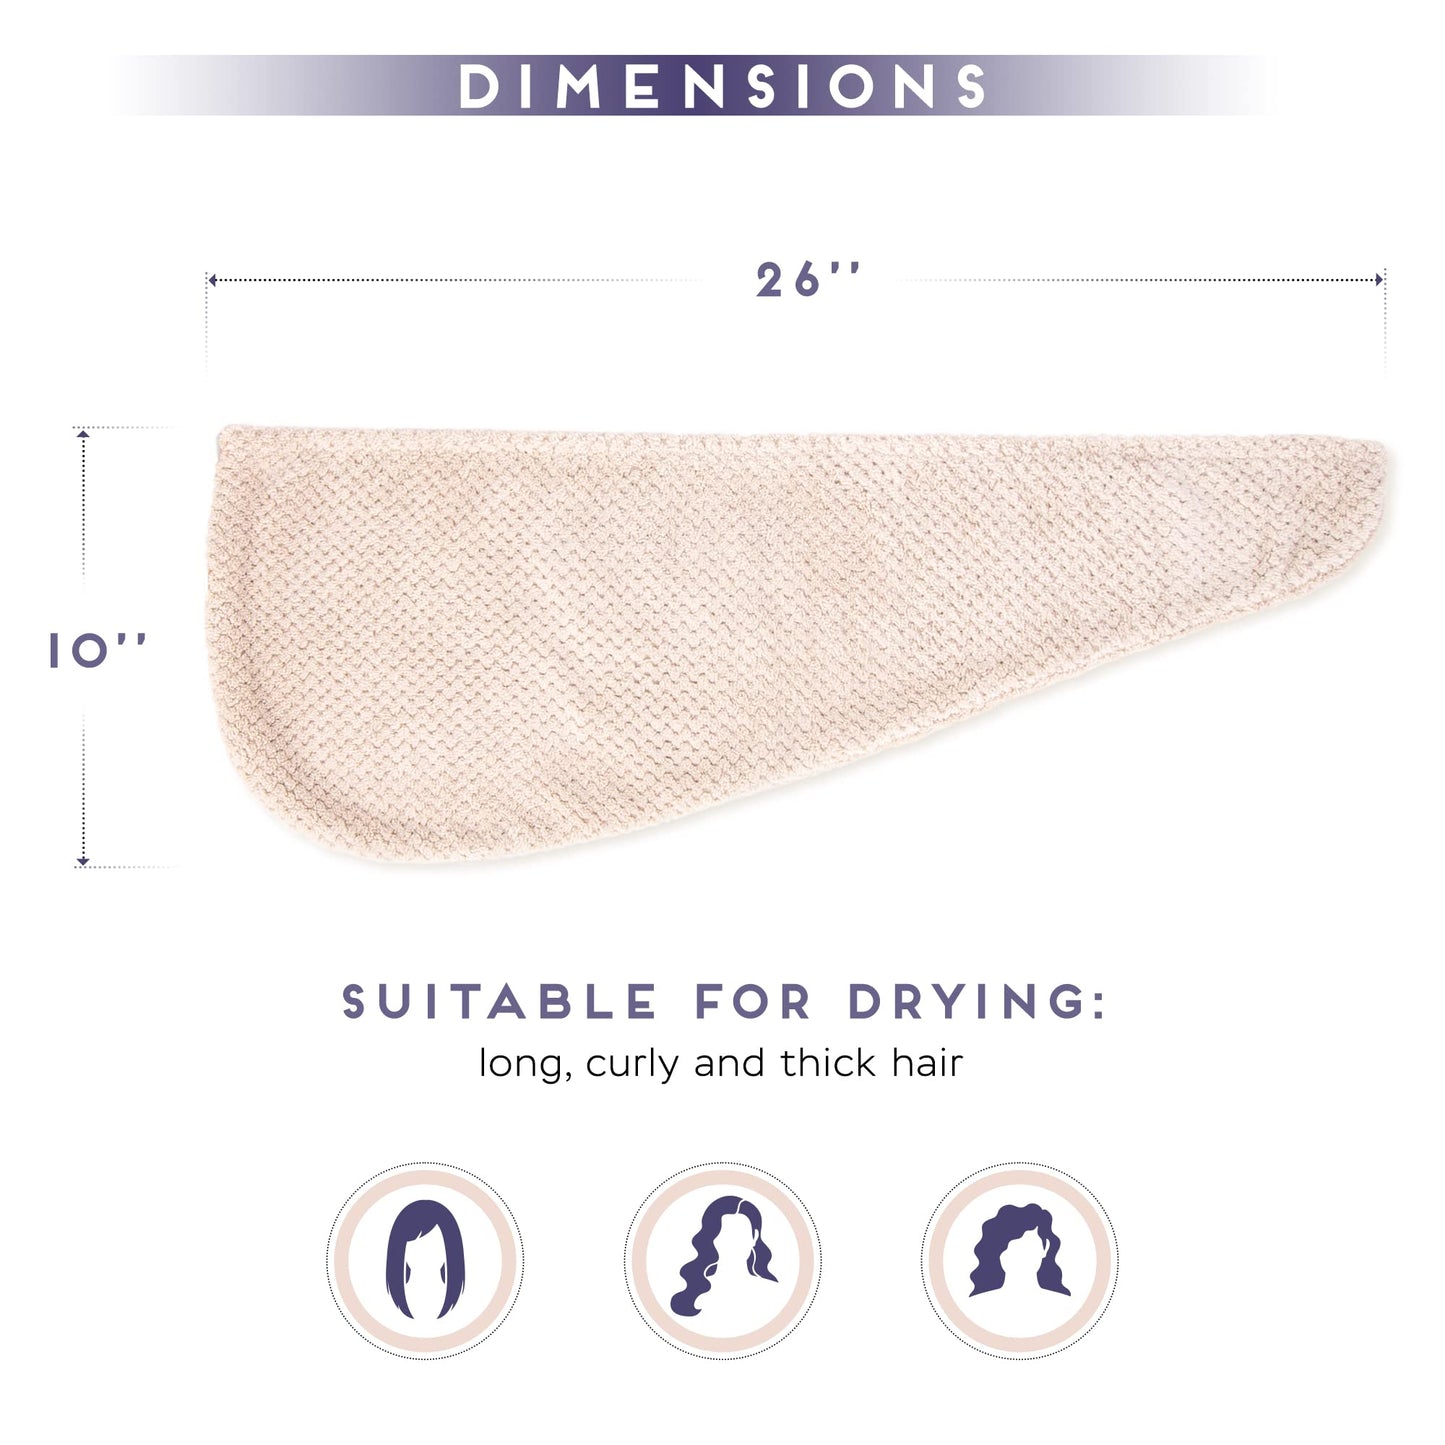 SimpleField 2 Pack Microfiber Hair Towel Wrap for Women, Anti Frizz Quick Drying Hair Turban for All Hair Style, Absorbent and Lightweight (Beige)